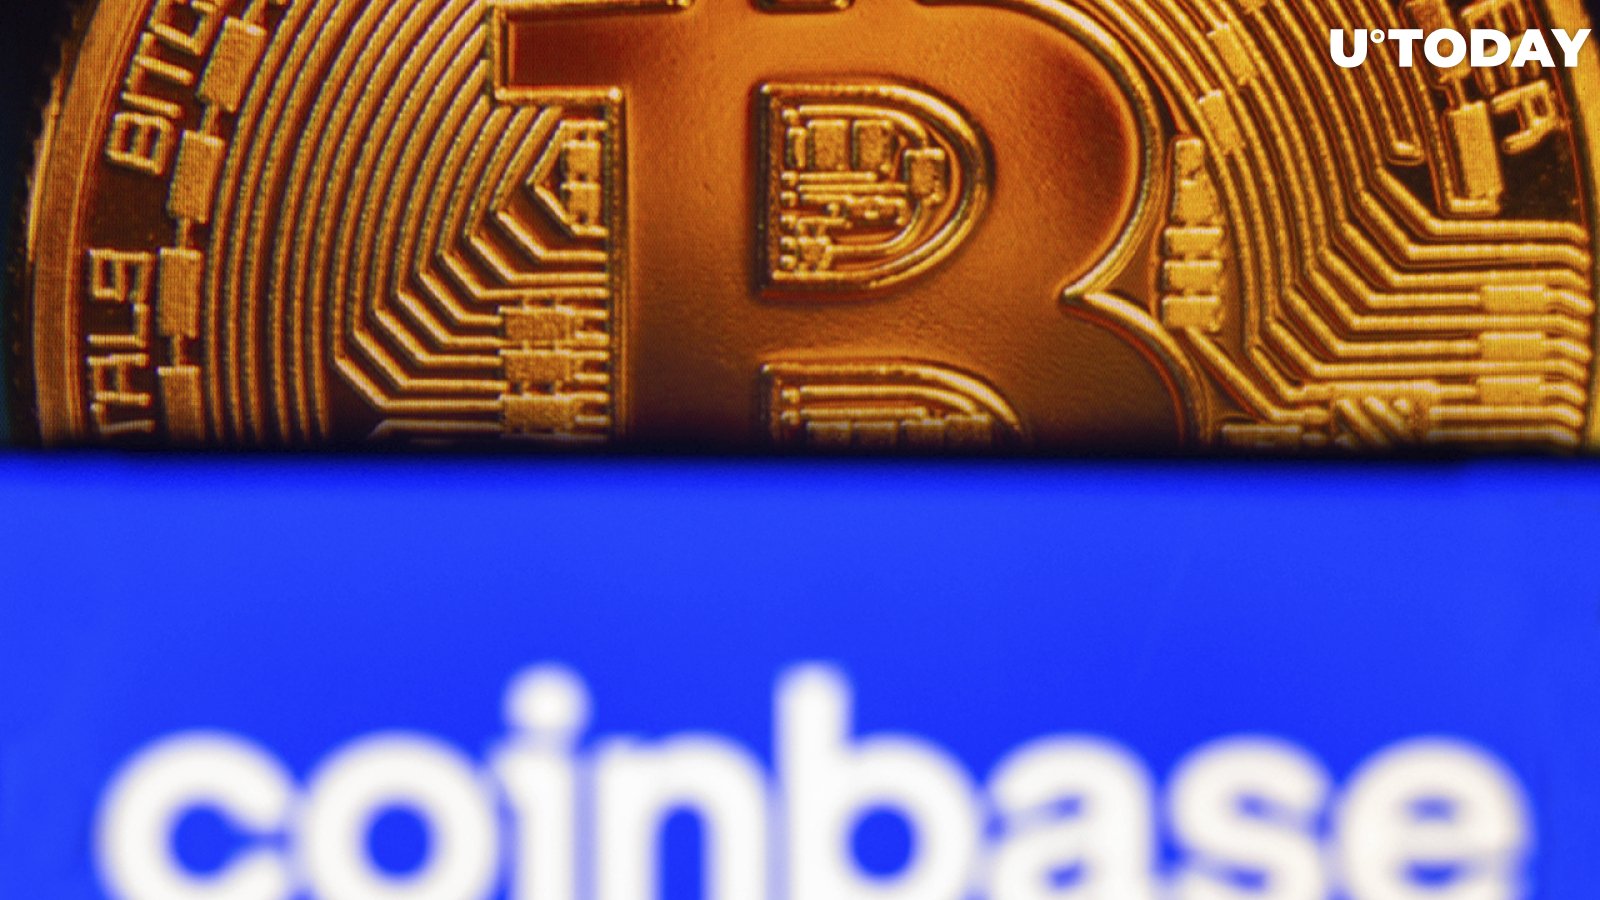 $1.175 Billion in Bitcoin Withdrawn from Coinbase by Anon Whales: Whale Alert